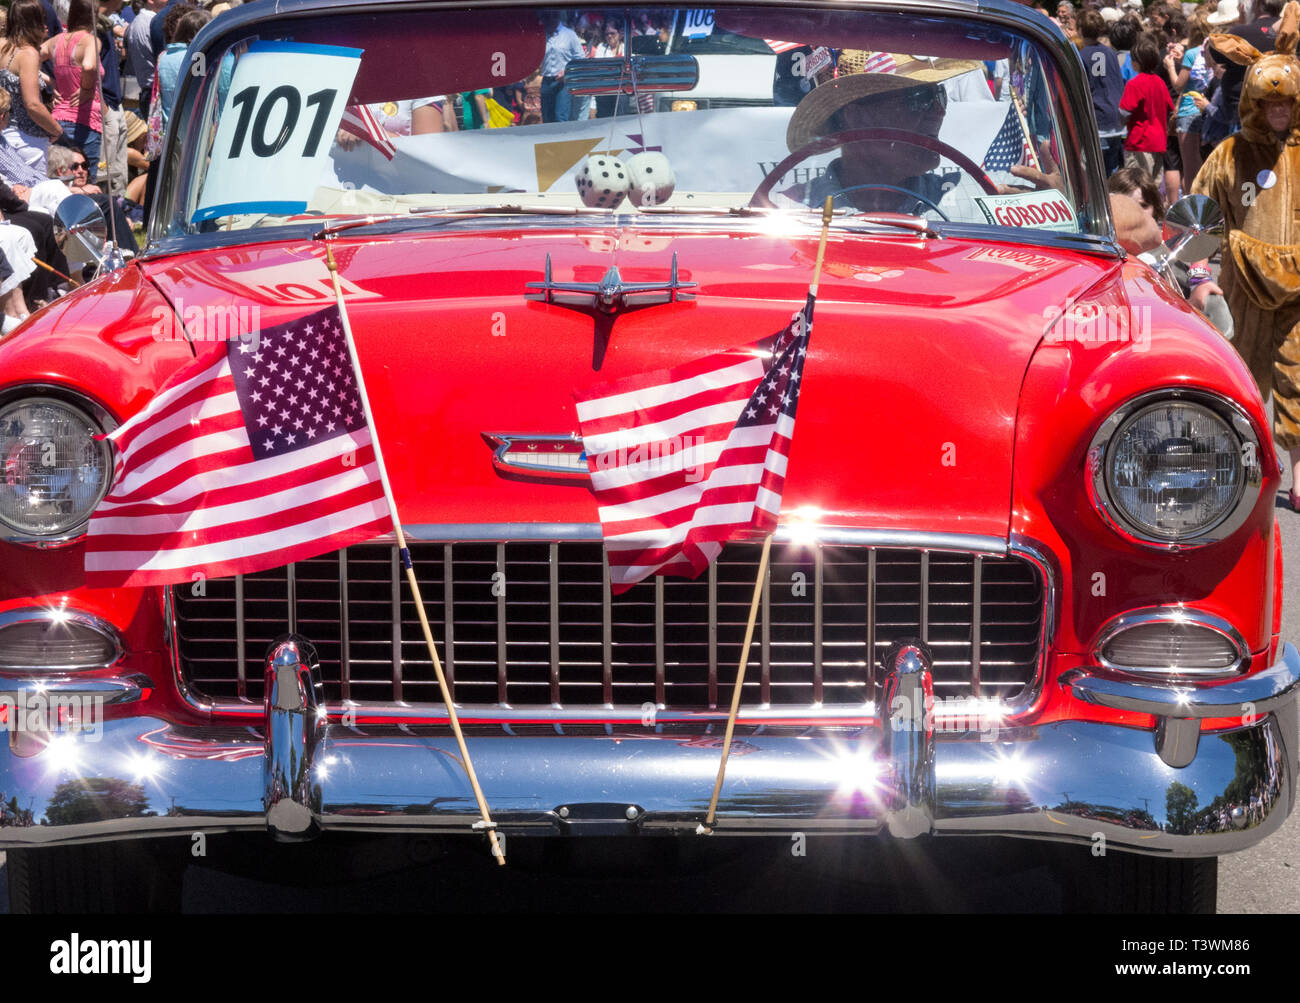 Man driving a classic Chevrolet Bel Air car automobile decorated with American flags in a traditional small town Fourth of July parade Stock Photo